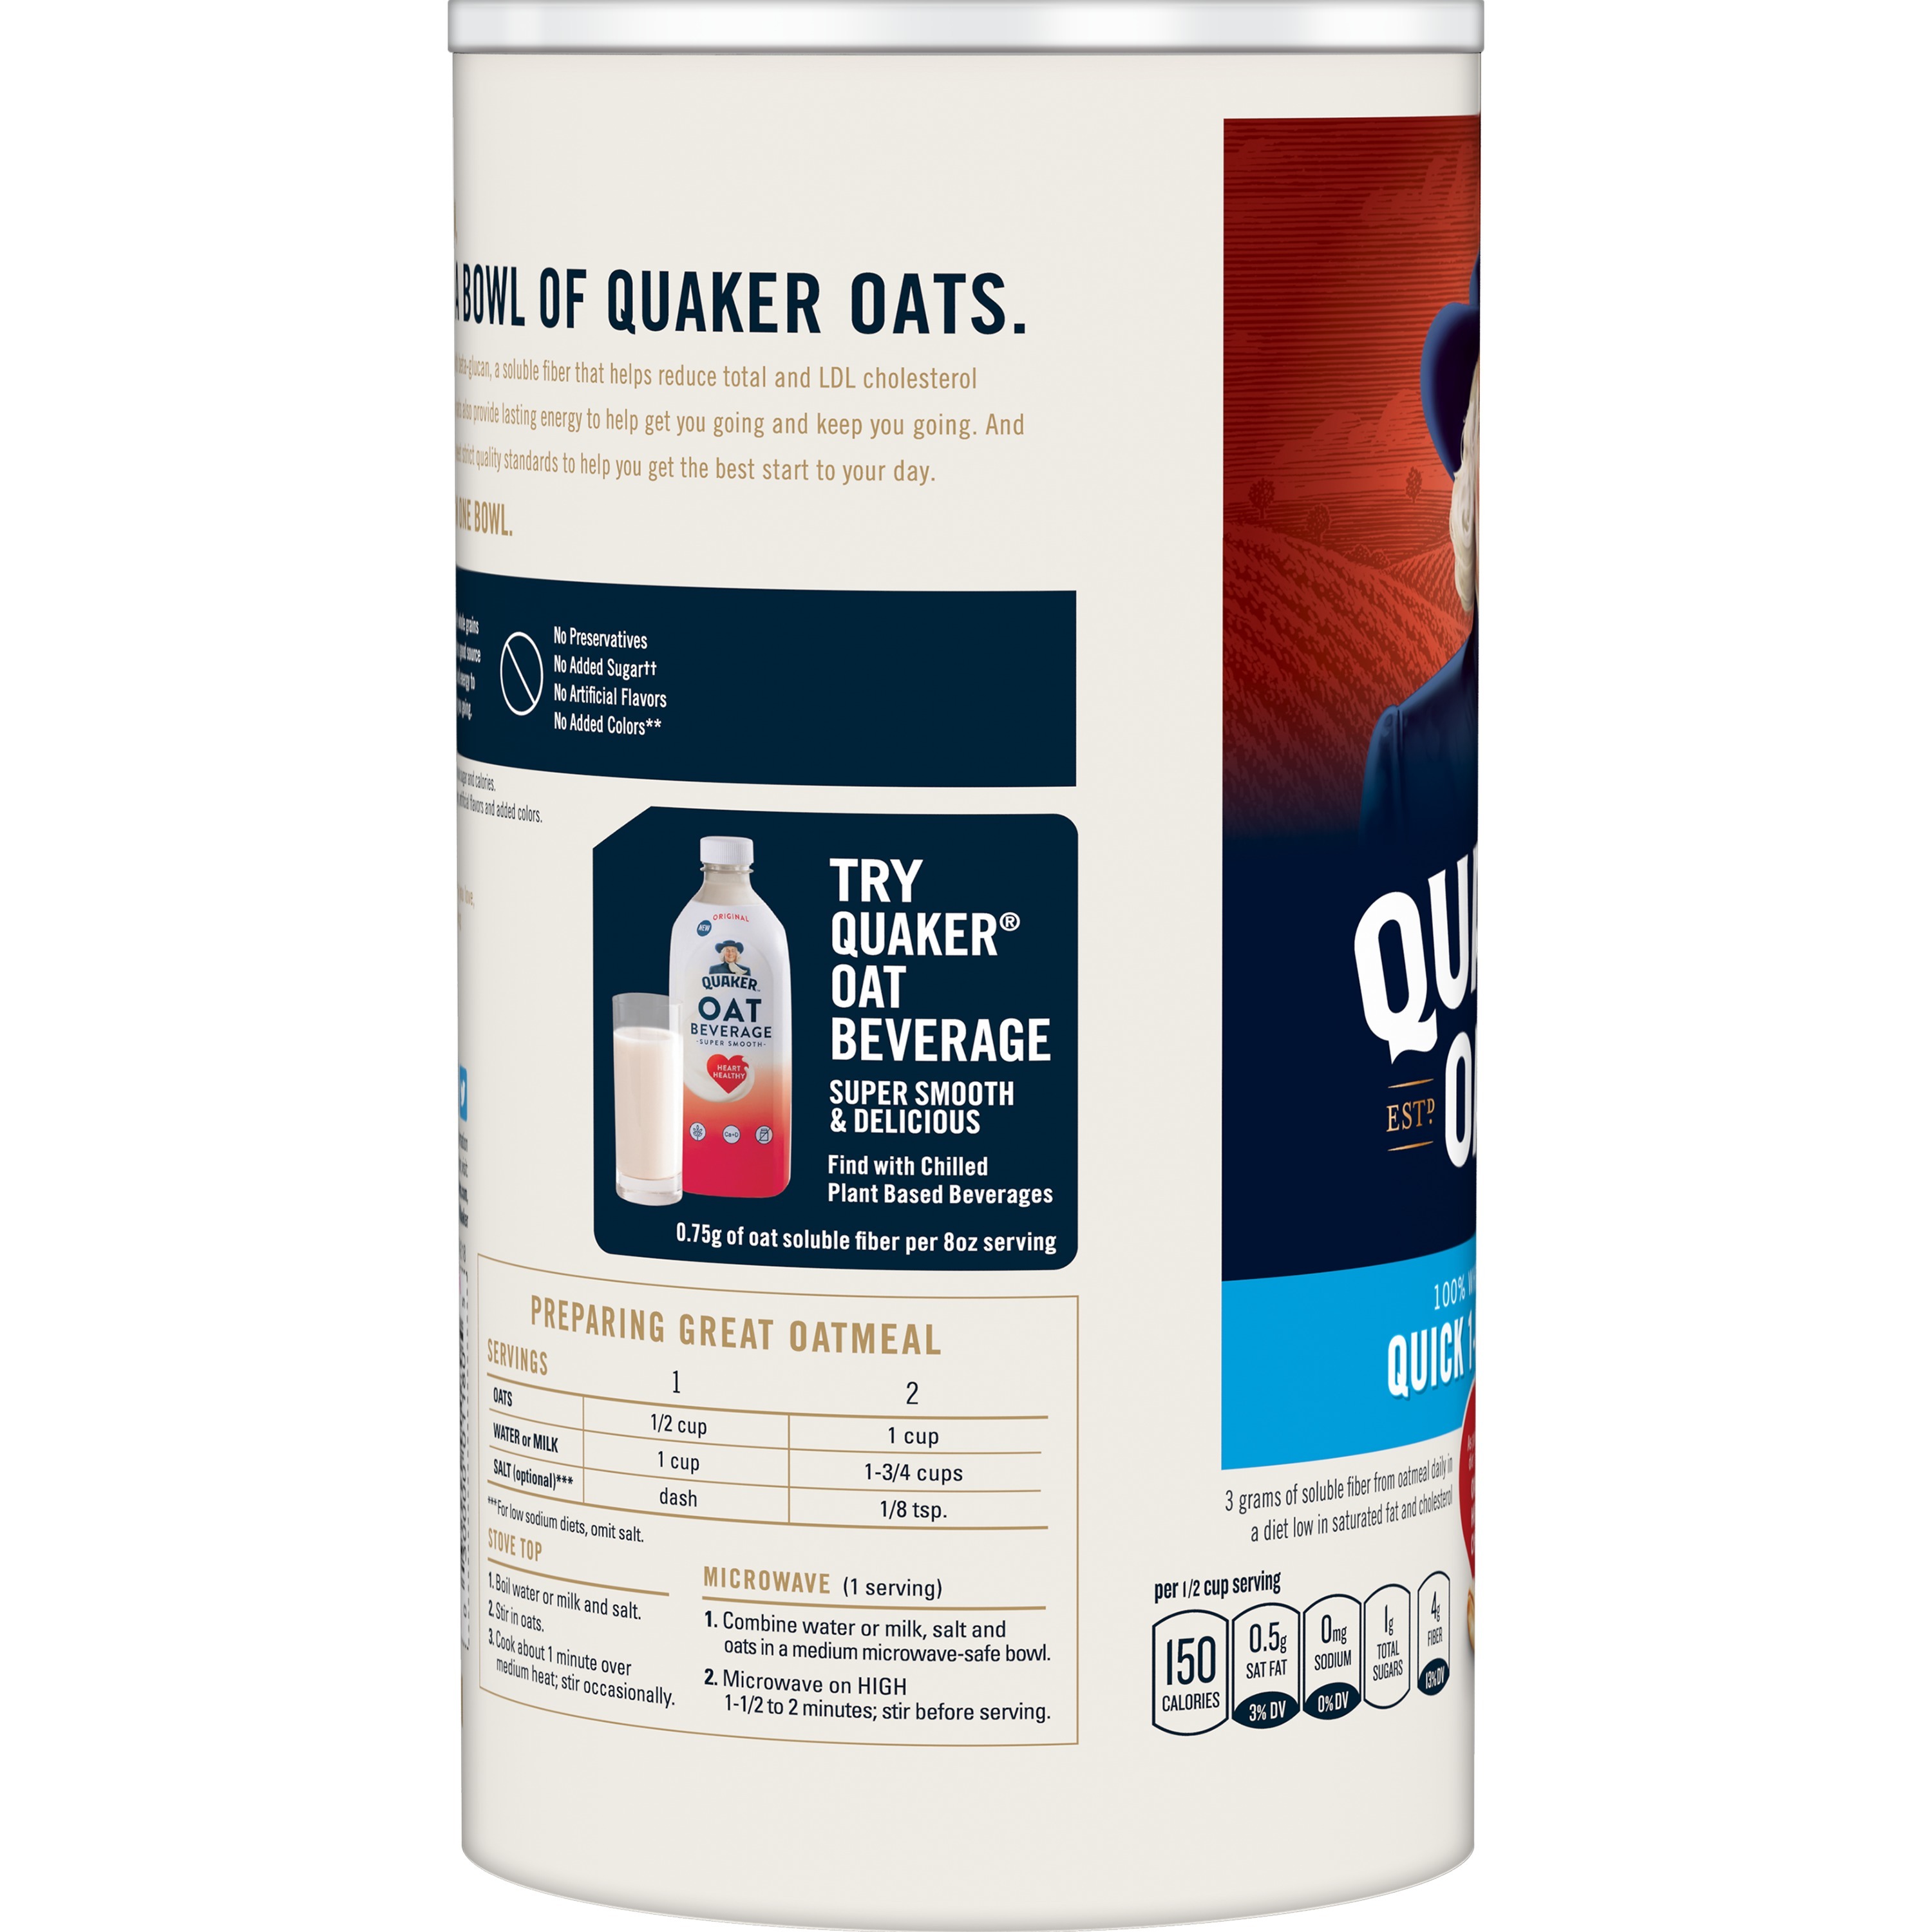 Quaker Whole Grain Oats, Quick Cook 1-Minute Oats, 18 oz Canister - image 5 of 9